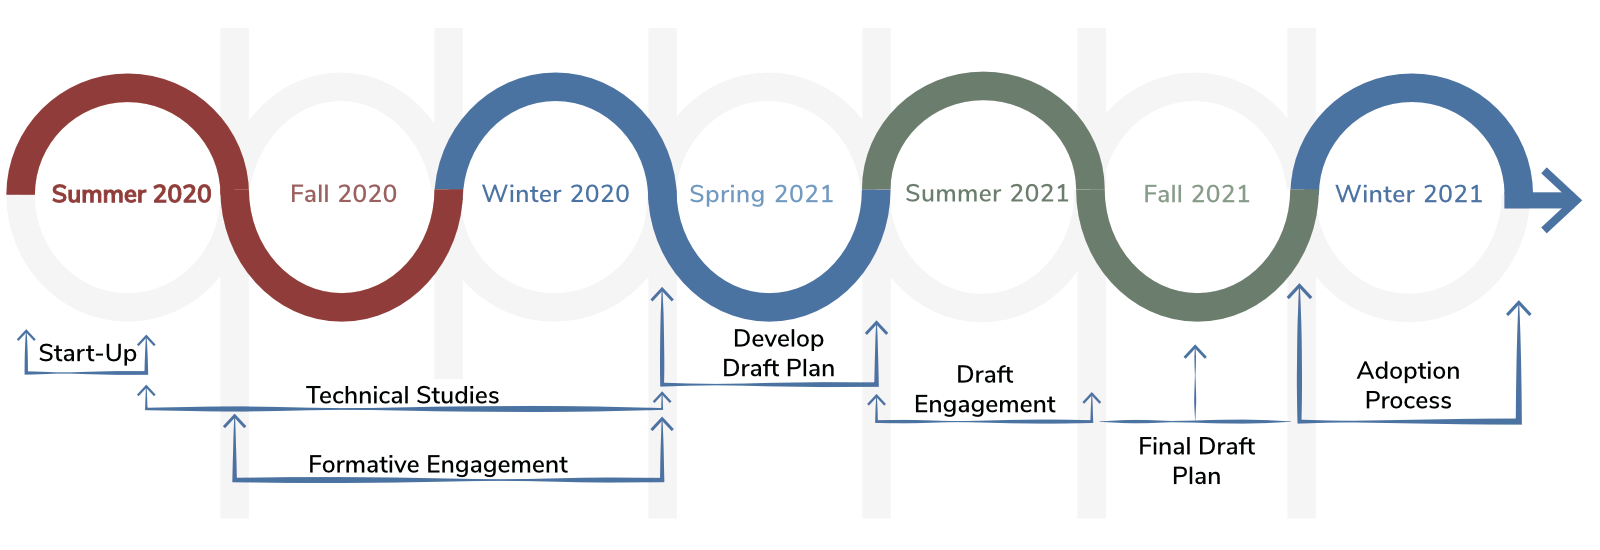 A timeline showing project start-up in summer 2020, technical studies from summer 2020 to winter 2020, formative engagement from fall 2020 to winter 2020, develop draft plan in spring 2021, draft engagement in summer 2021, final draft plan in fall 2021, and the adoption process in winter 2021.